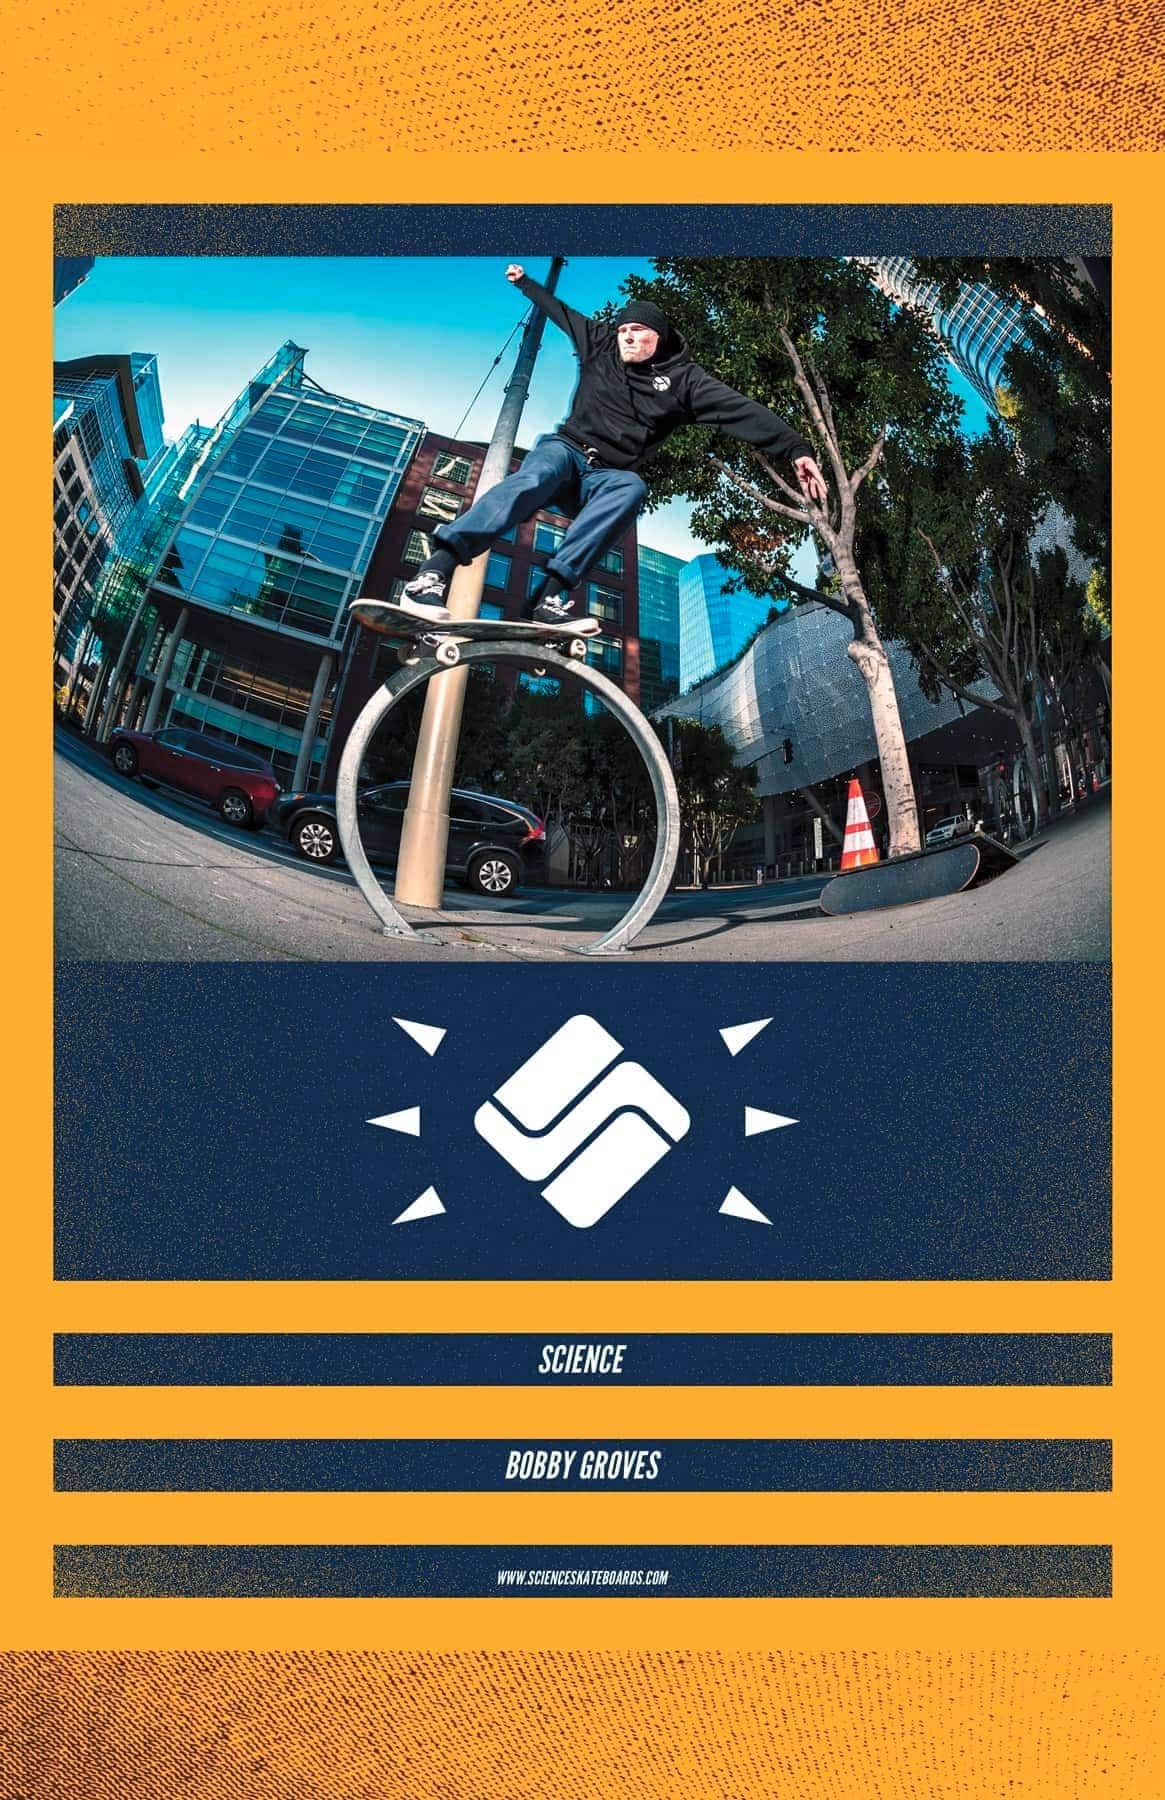 skate jawn skateboard magazine ad san francisco photography and graphic design 